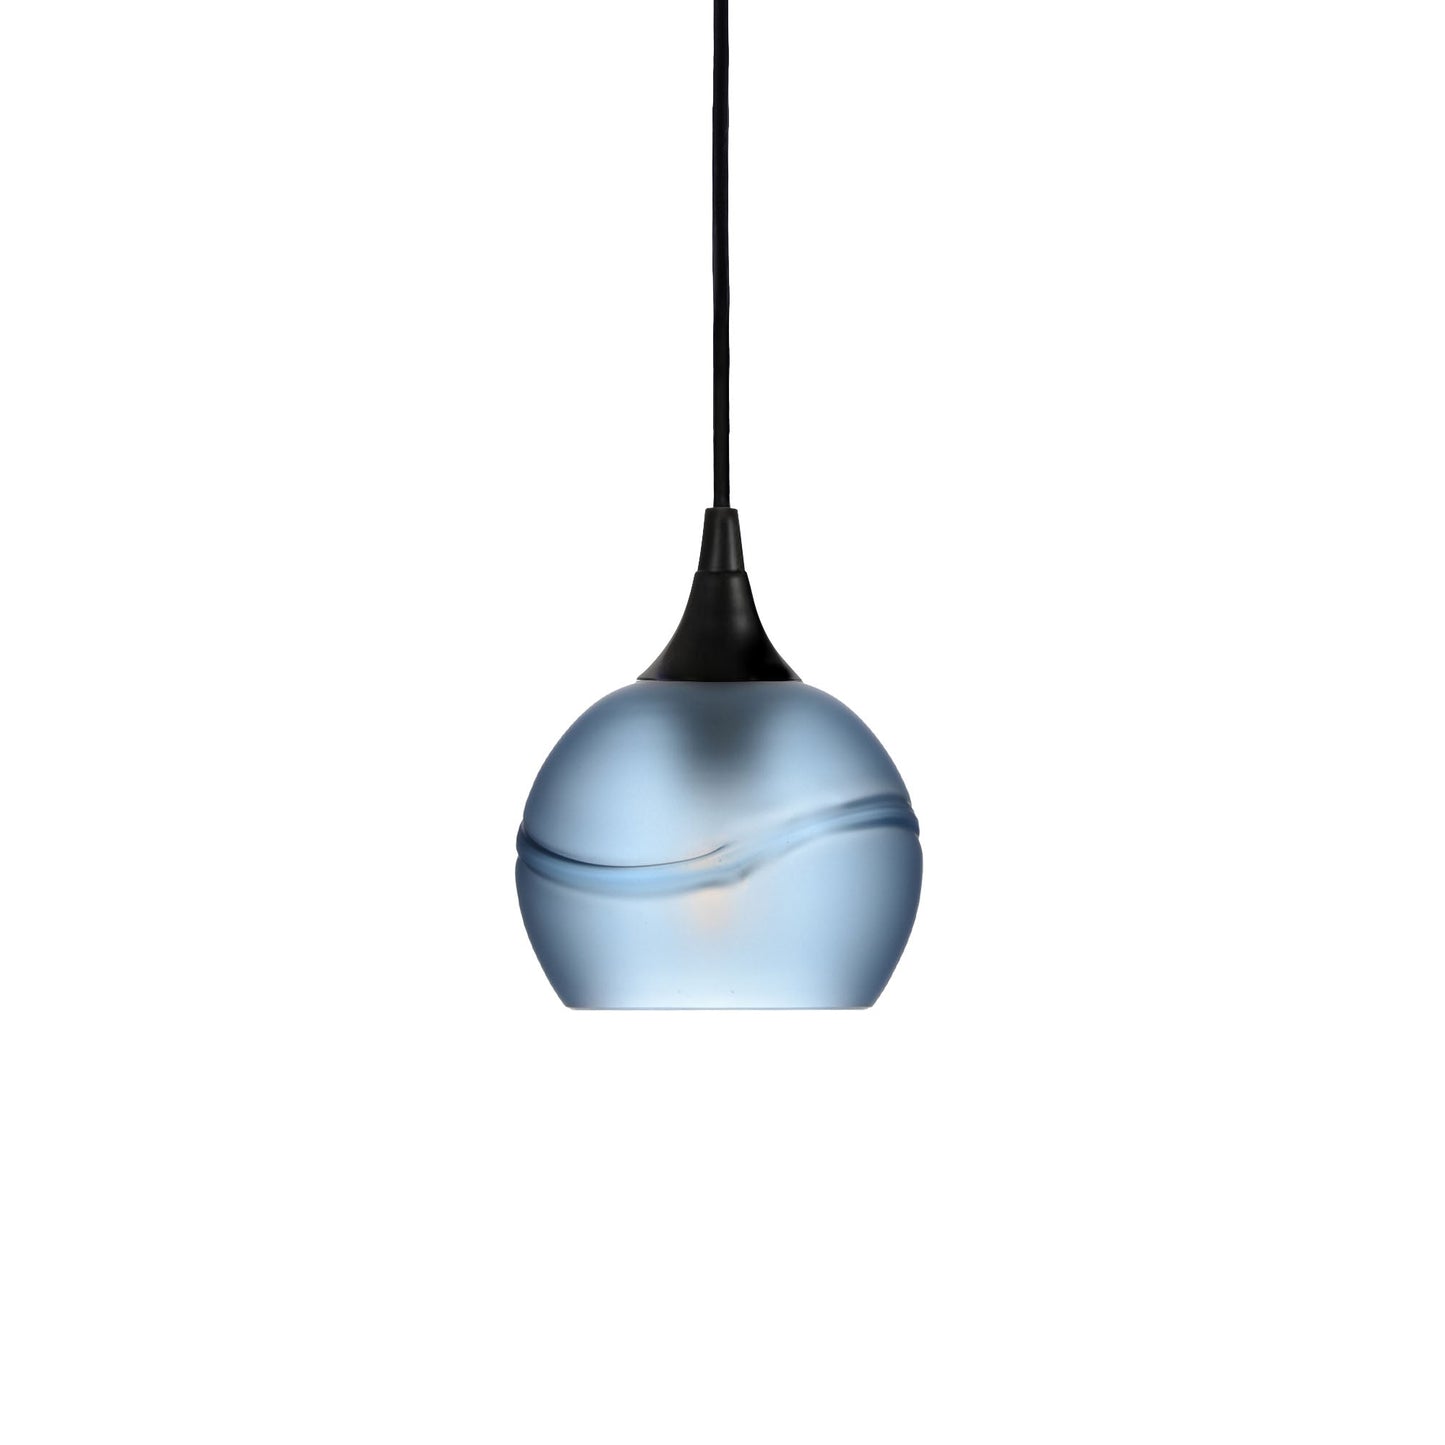 763 Glacial: Single Pendant Light-Glass-Bicycle Glass Co - Hotshop-Steel Blue-Matte Black-Bicycle Glass Co